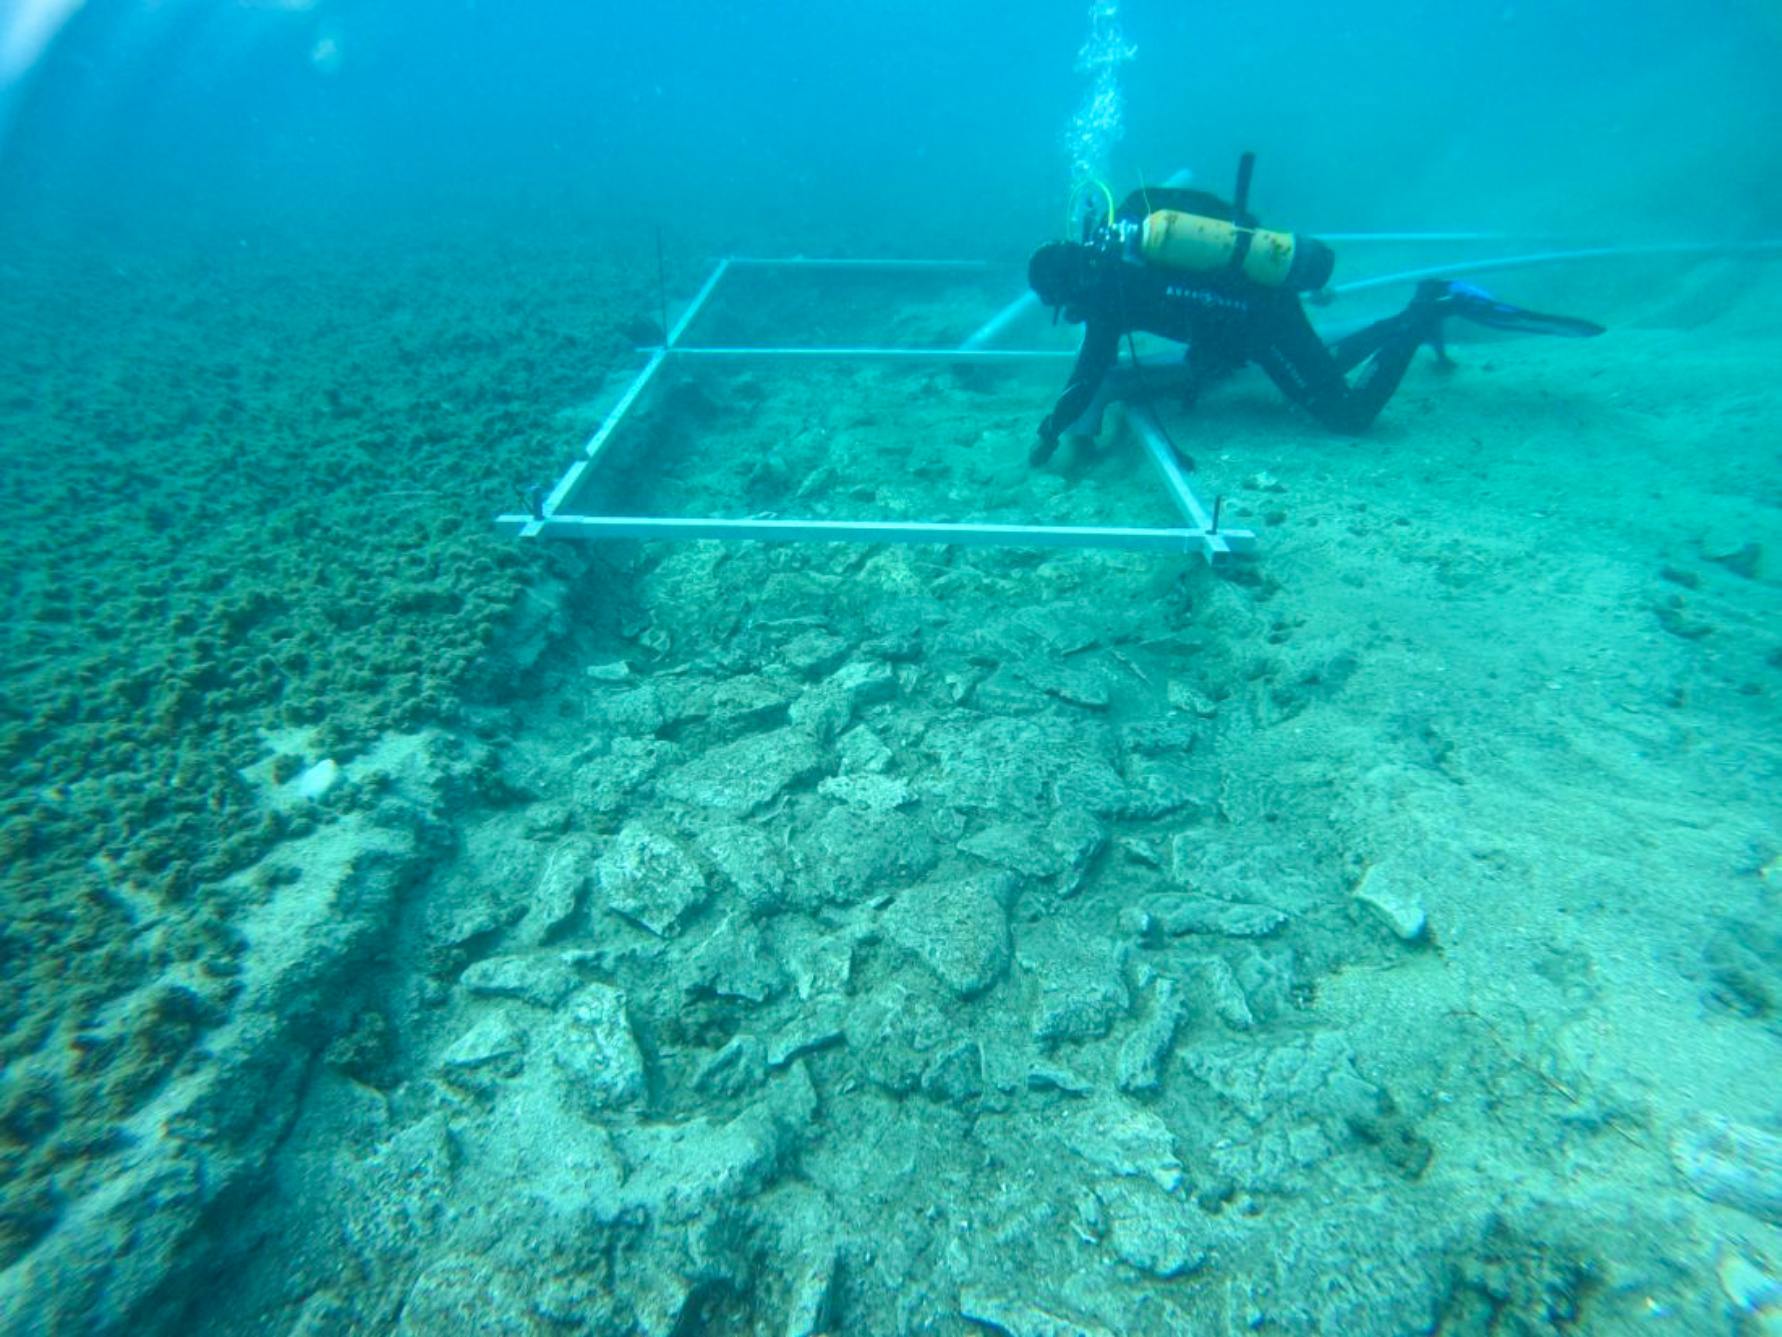 A diver explores an underwater roadway that had been buried by mud for thousands of years.